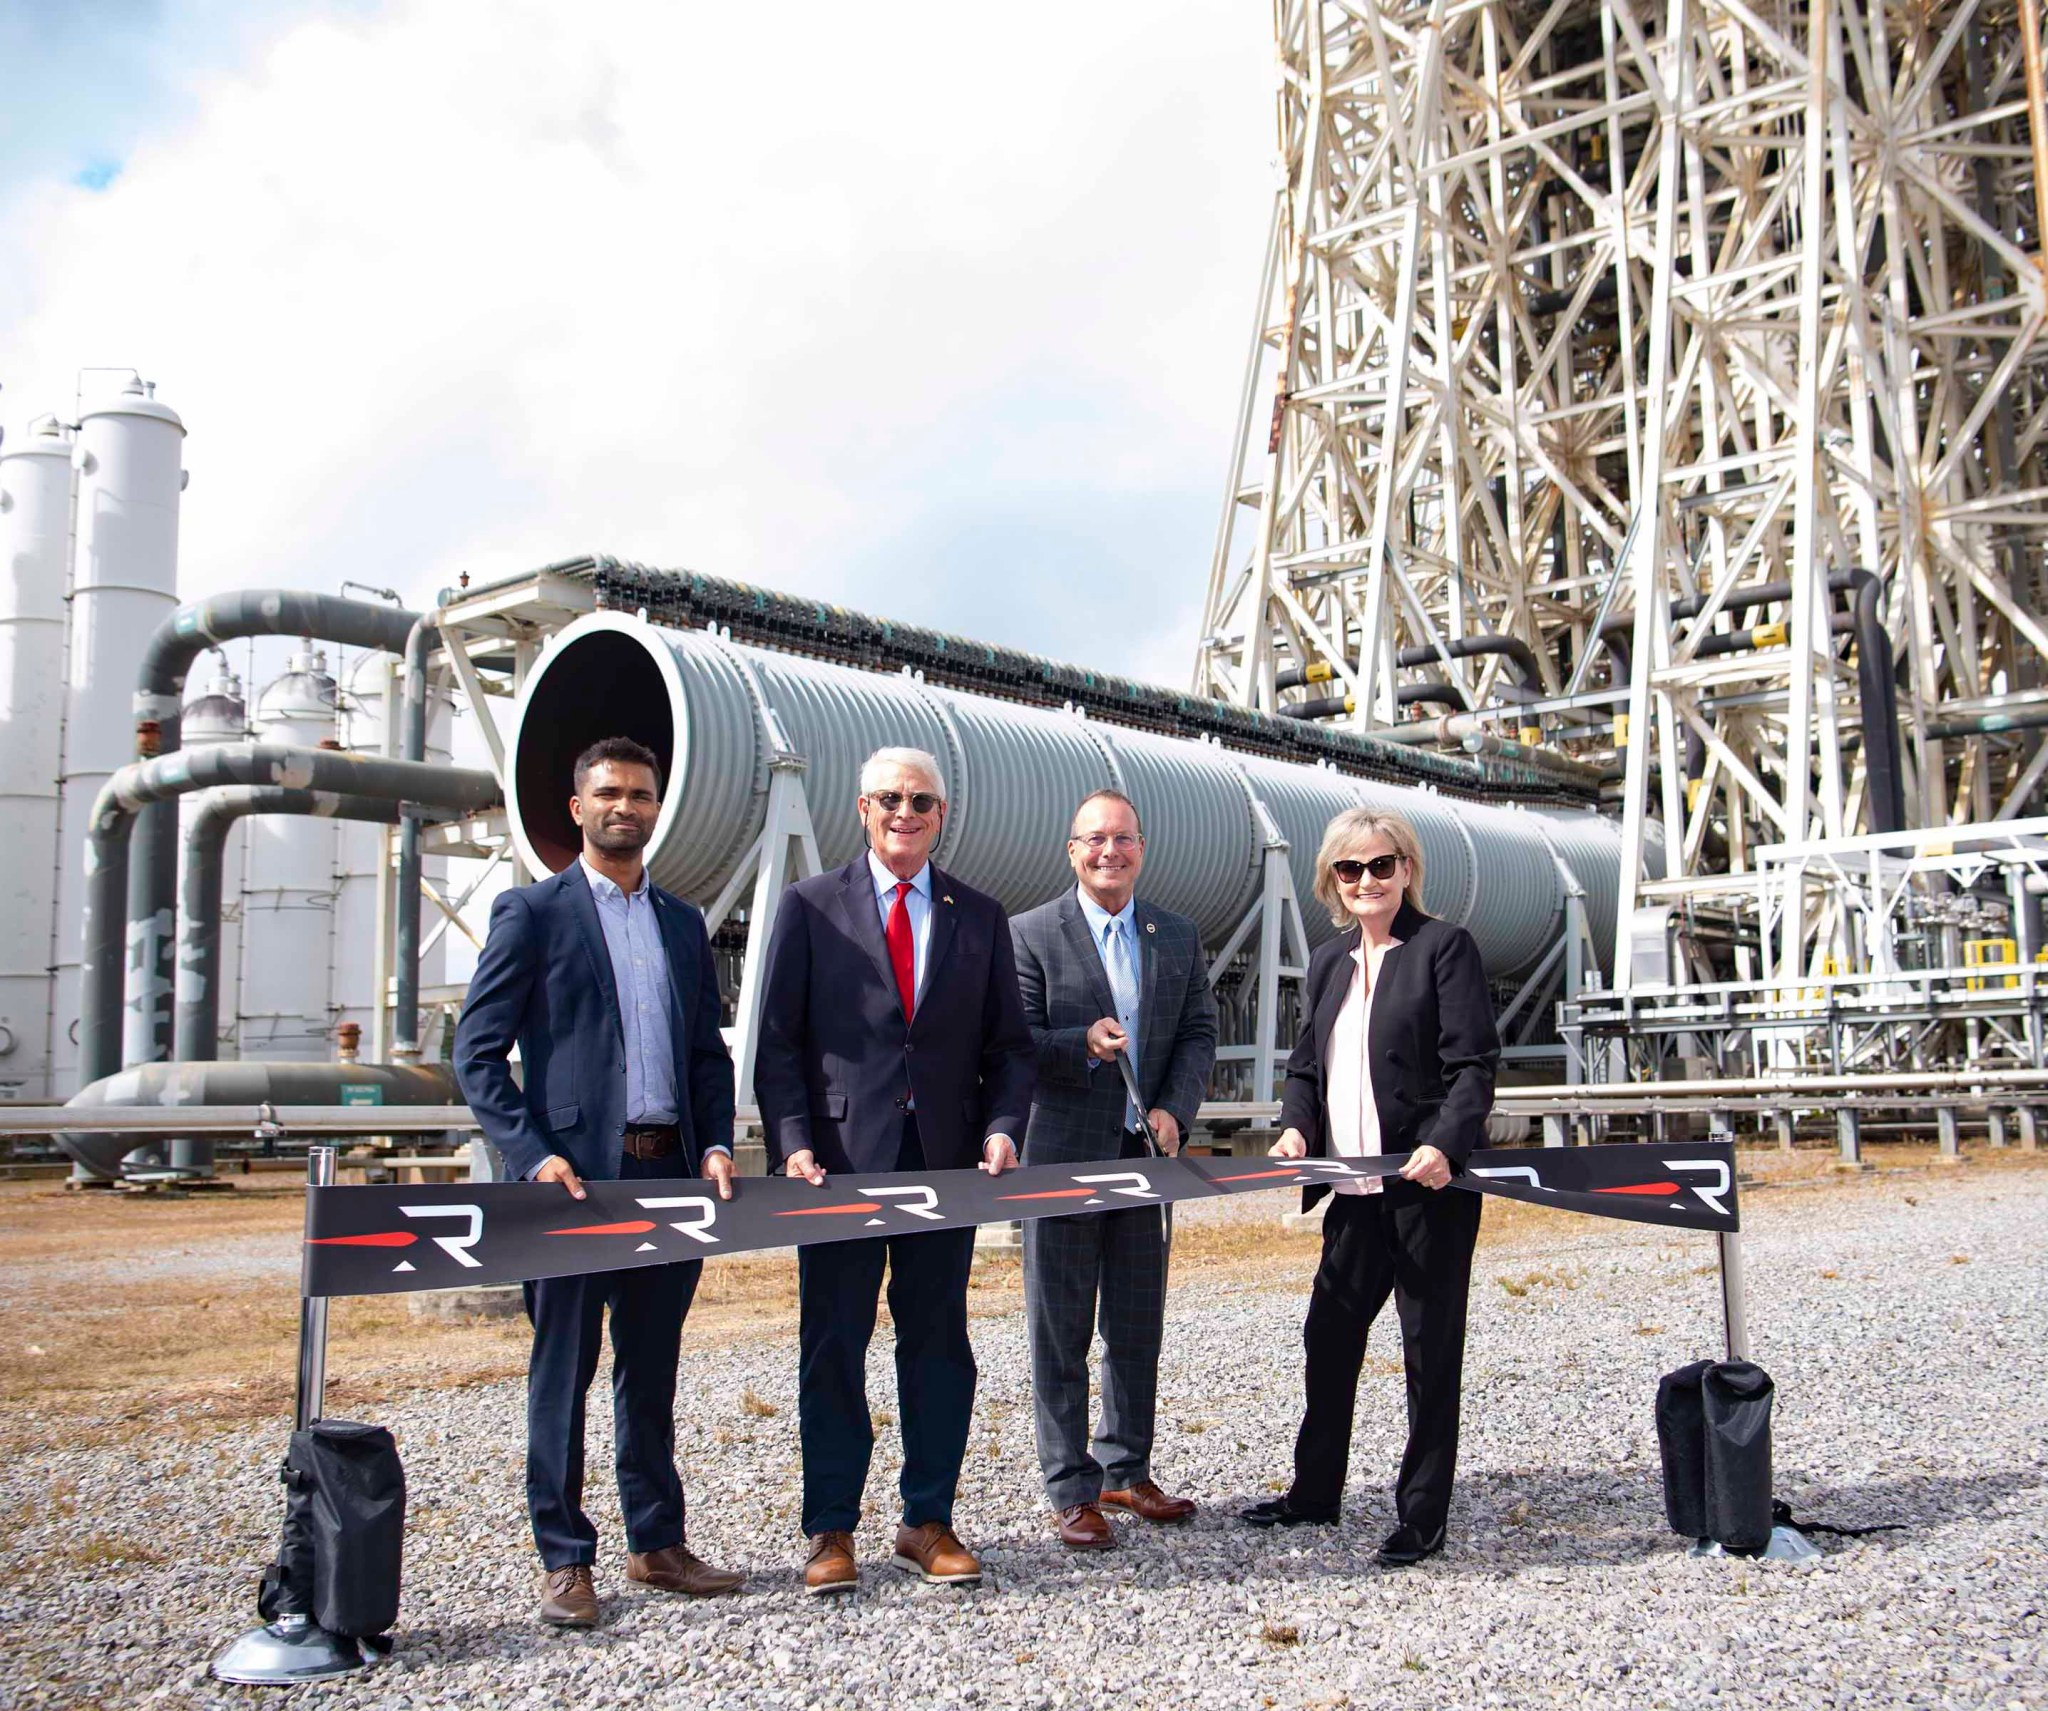 Officials cut the ribbon during a Nov. 4 ceremony marking an agreement for Rocket Lab USA to locate its new engine test complex at NASA’s Stennis Space Center